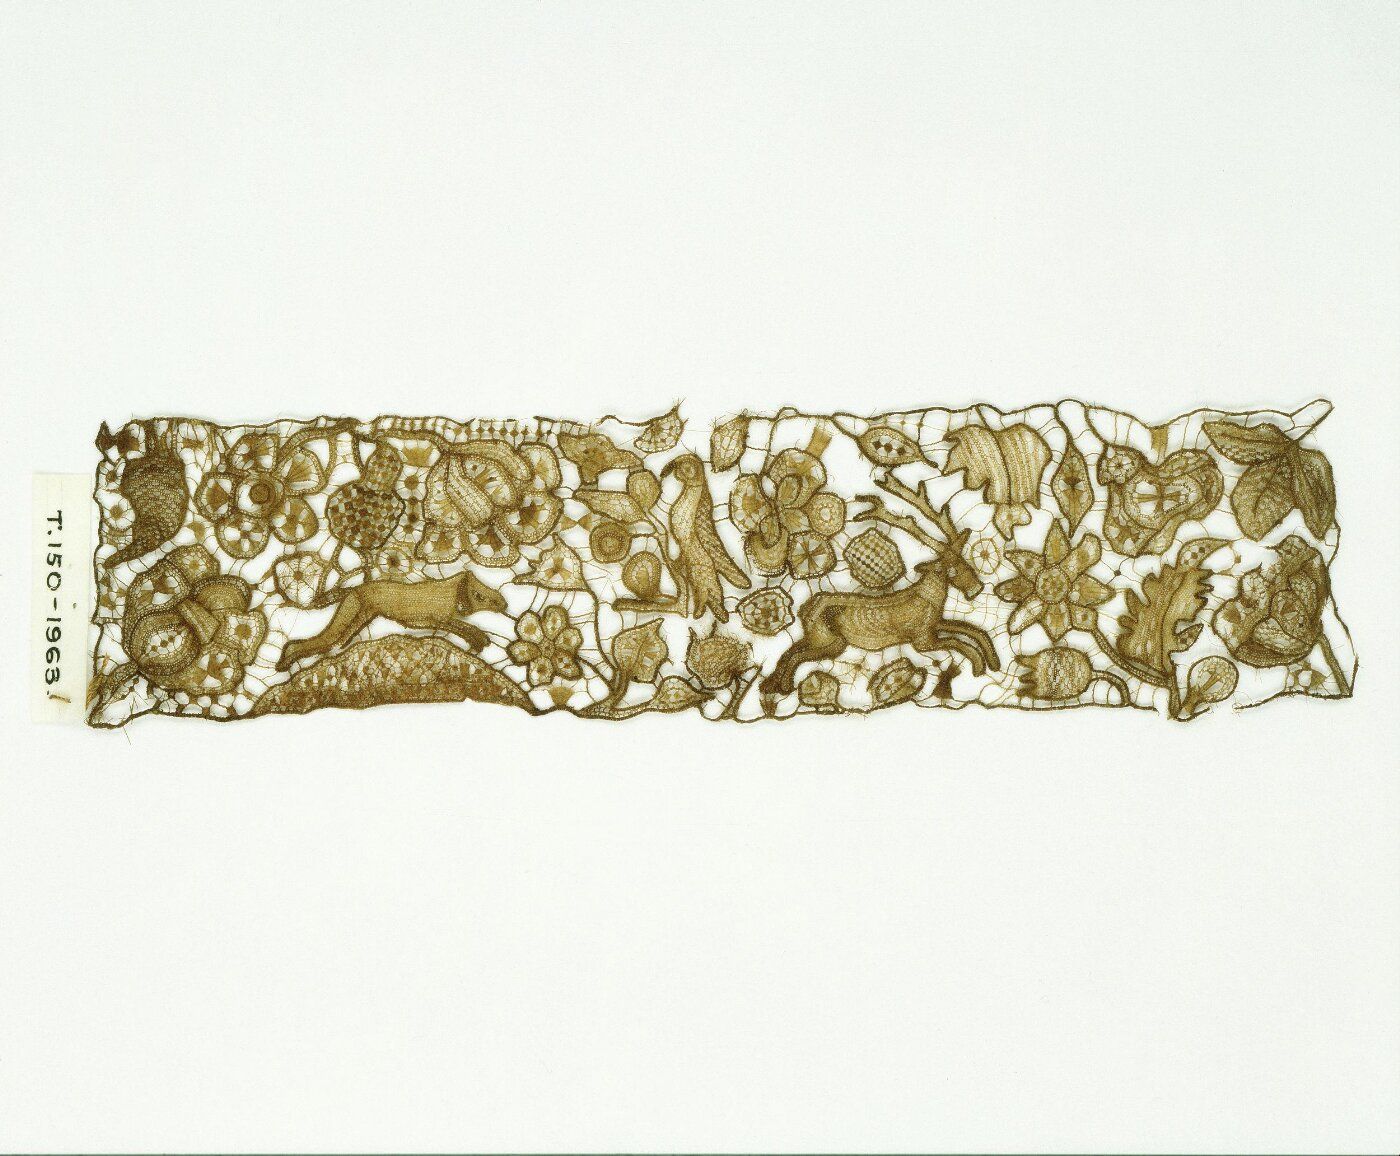 Band of lace, ca. 1640-1680, in the collection of the V&A. 